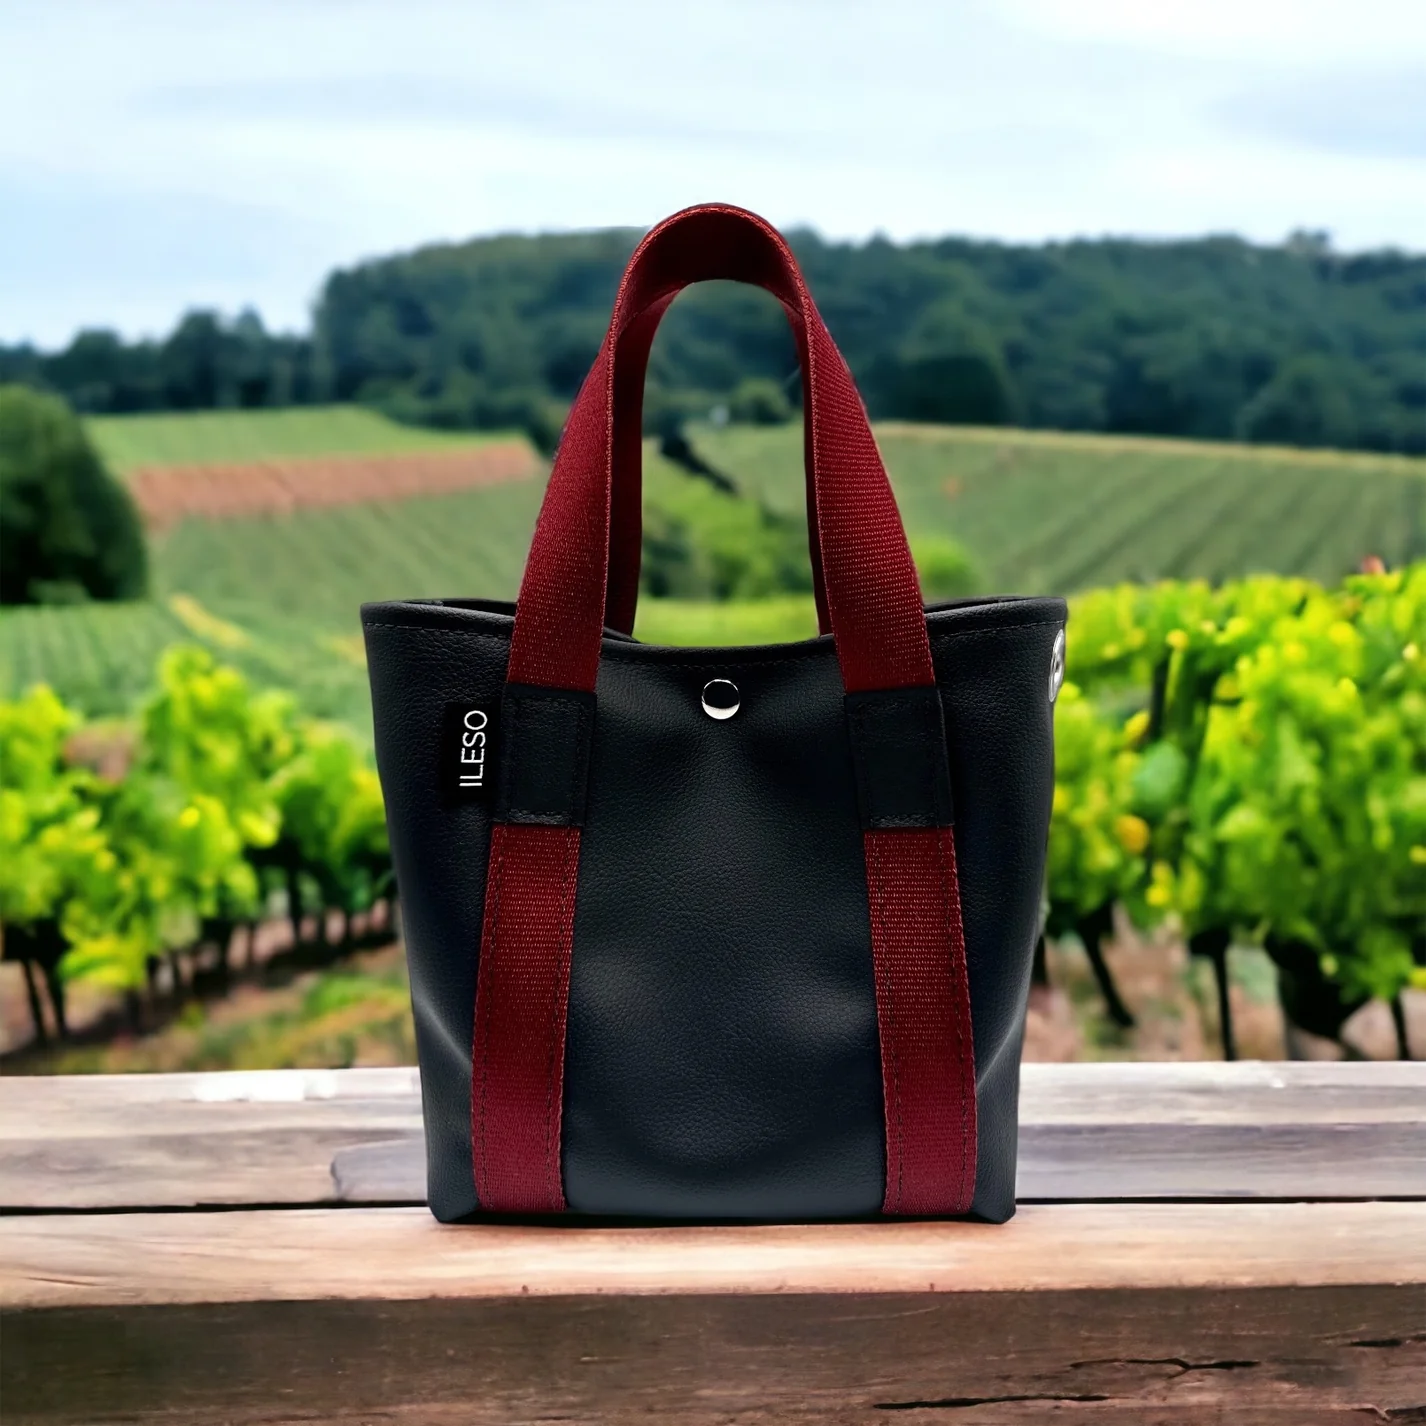 Ileso Wine Bag in front of a vineyard